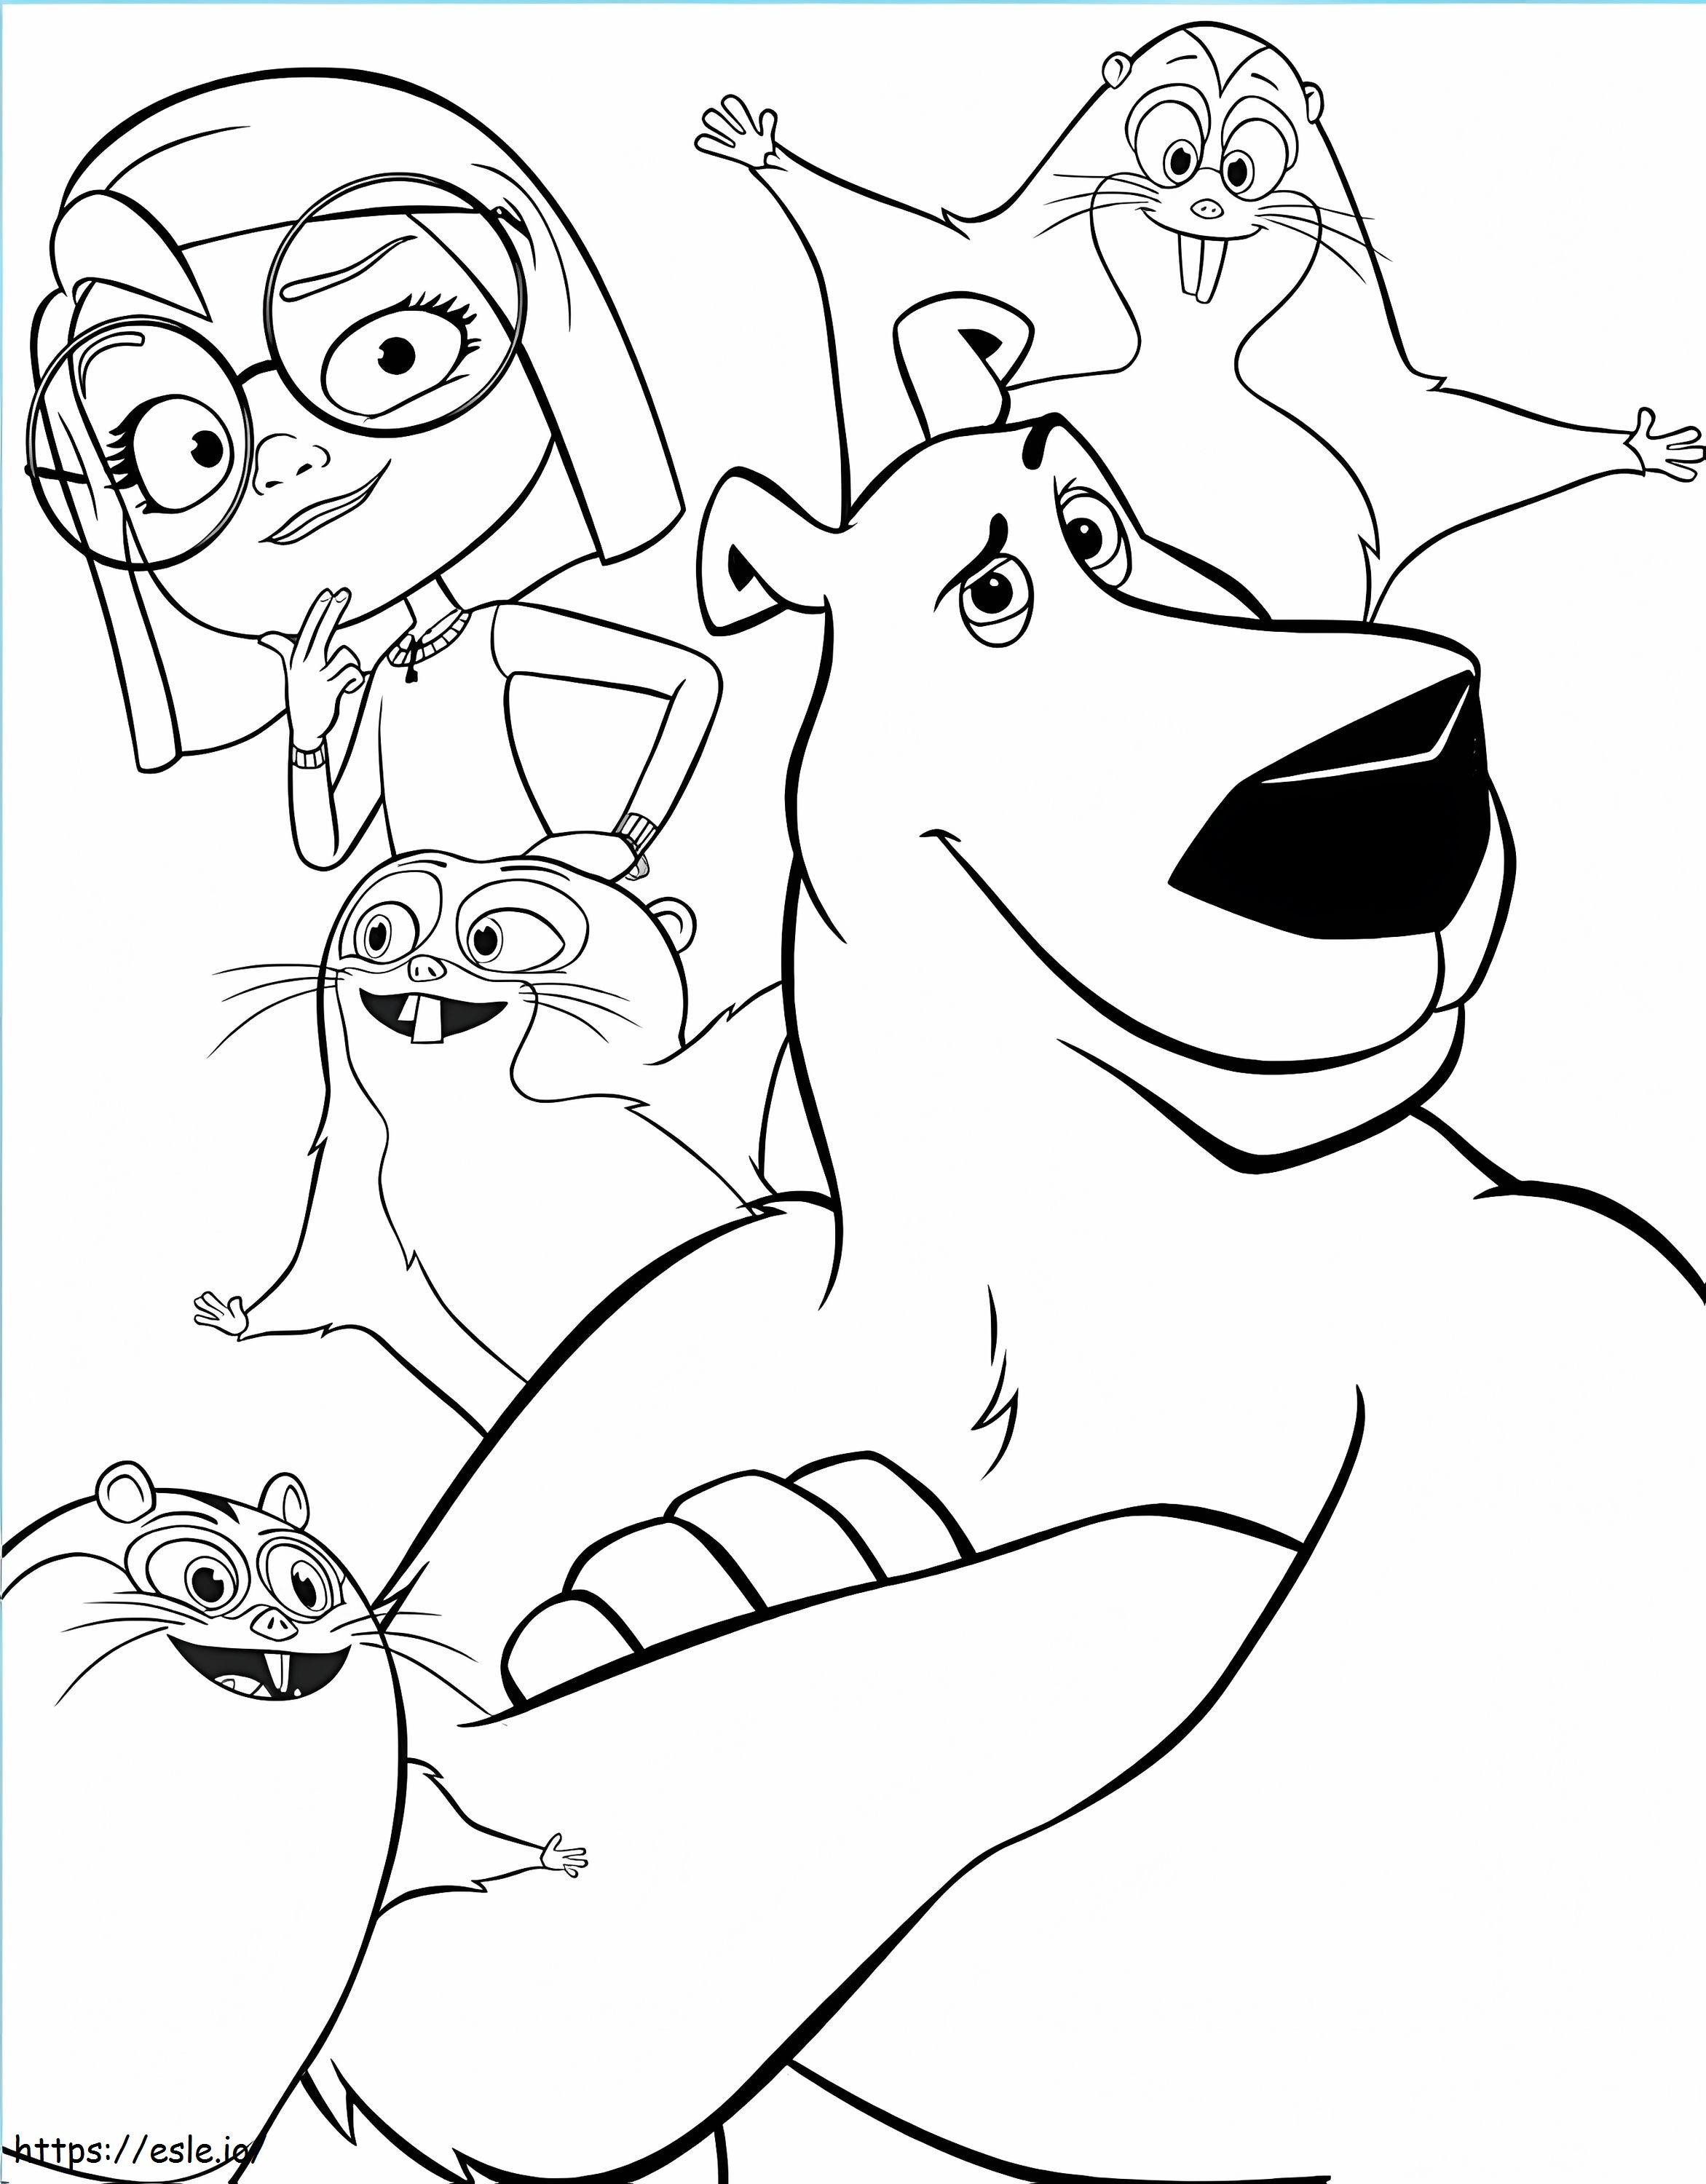 Characters From Norm Of The North coloring page